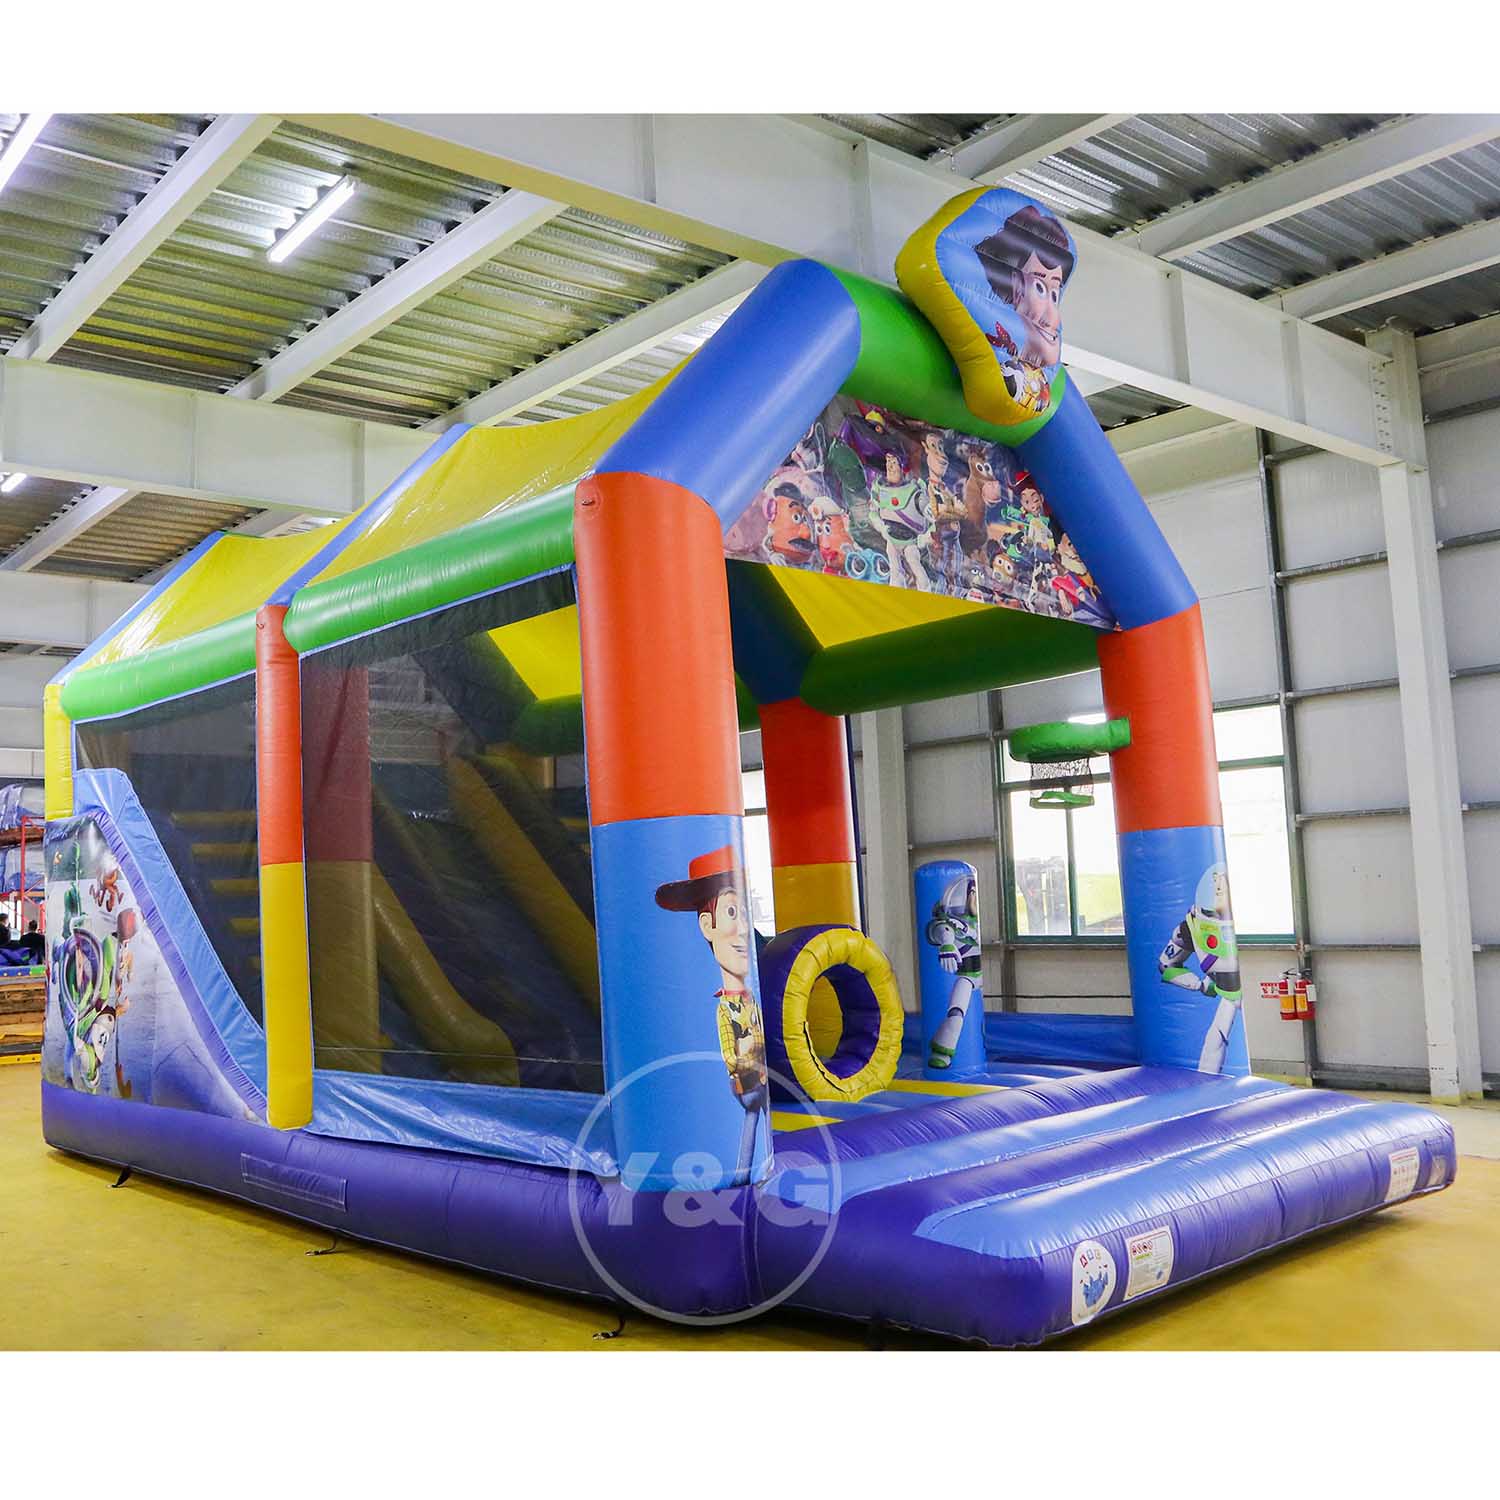 Toy Story Inflatable Bounce HouseYG-157